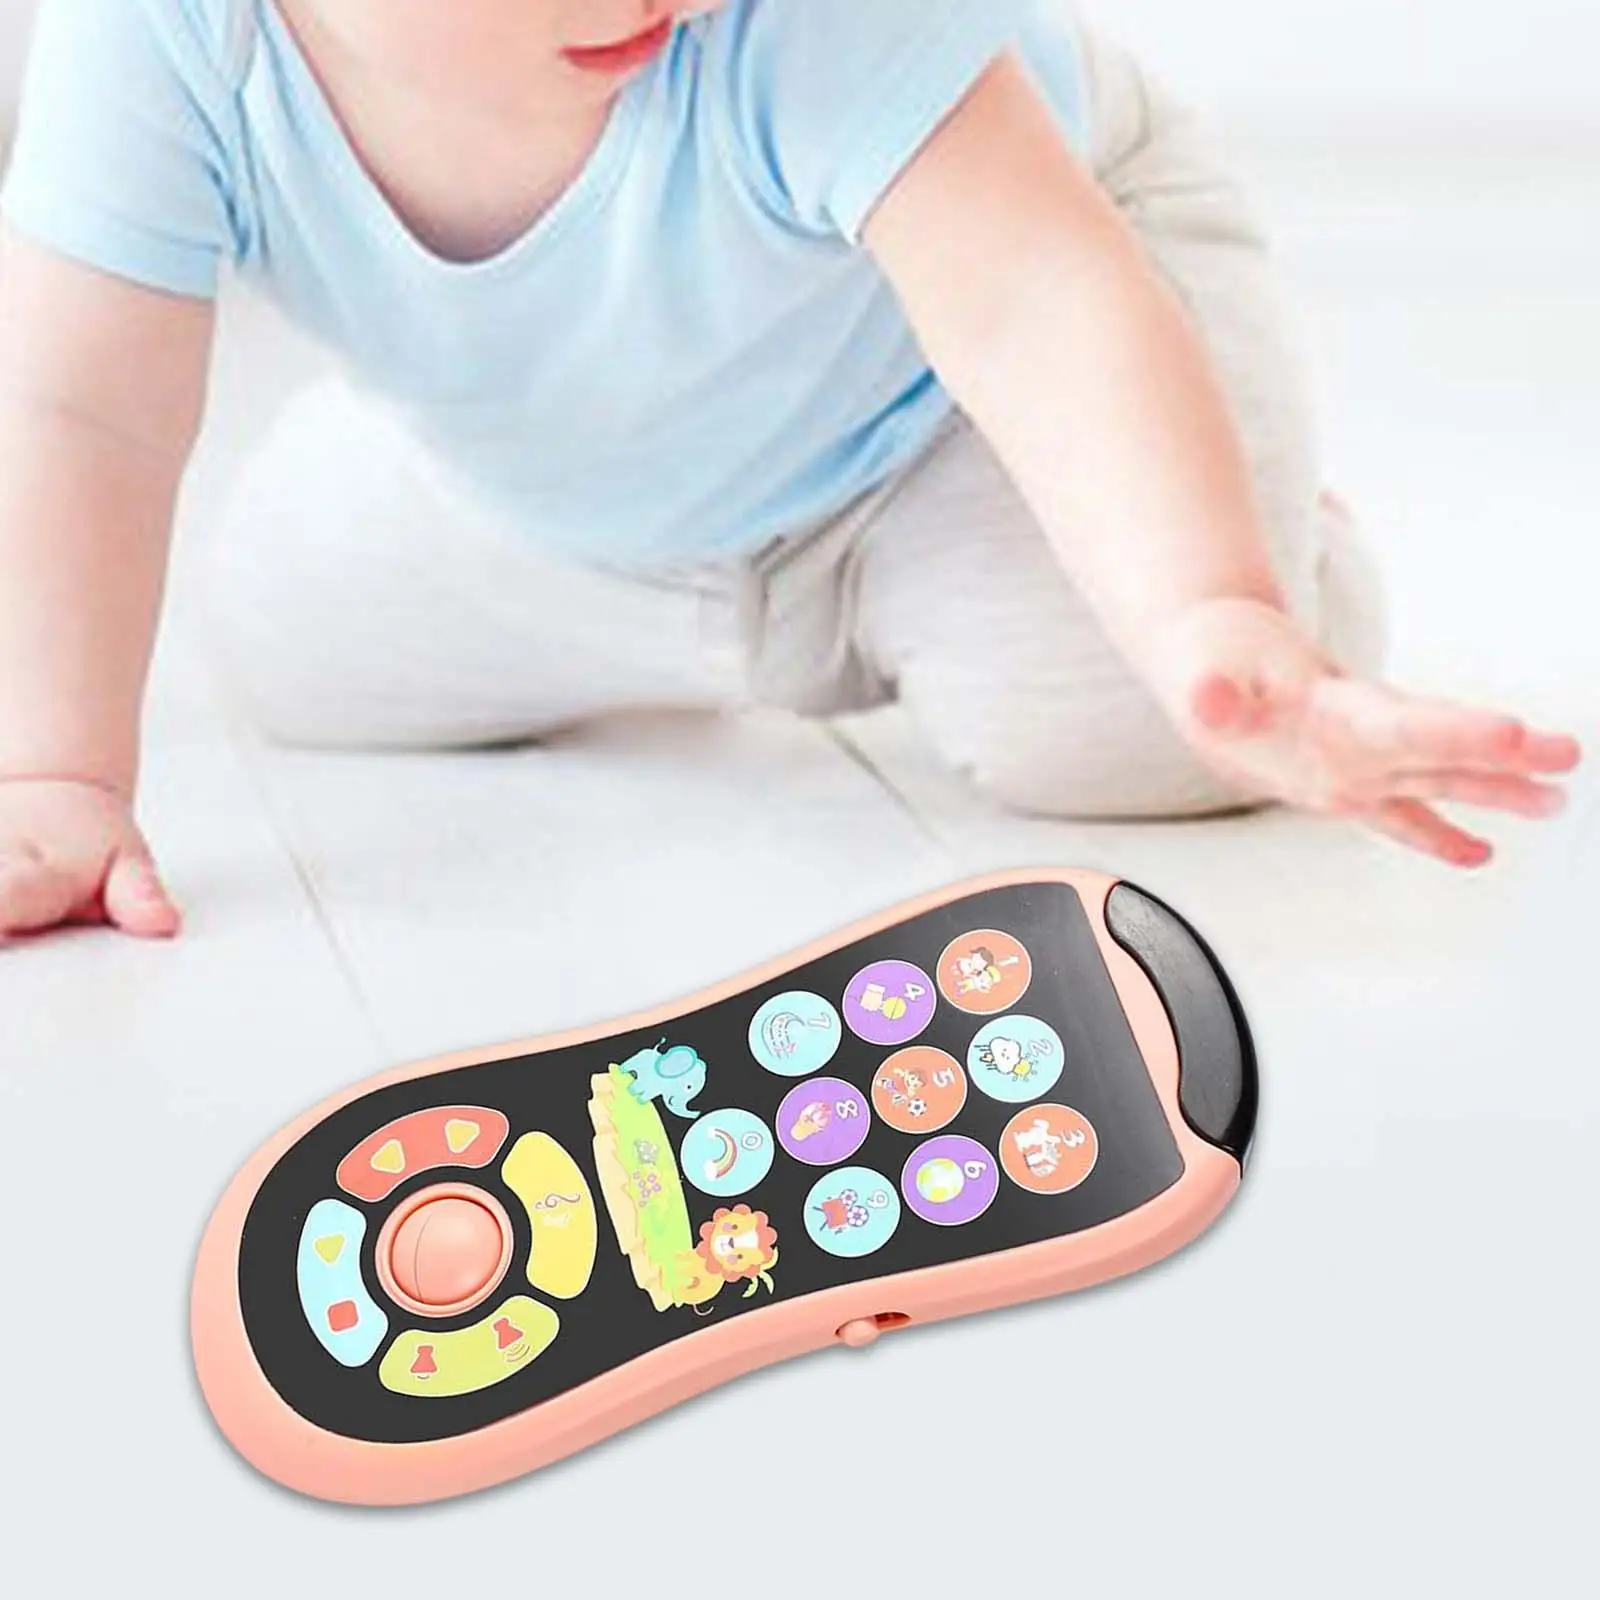 Mini Phone Toys Learning Educational Toy Phone Toy with Lights and Music for Children Preschool Toddlers Boy Birthday Gift